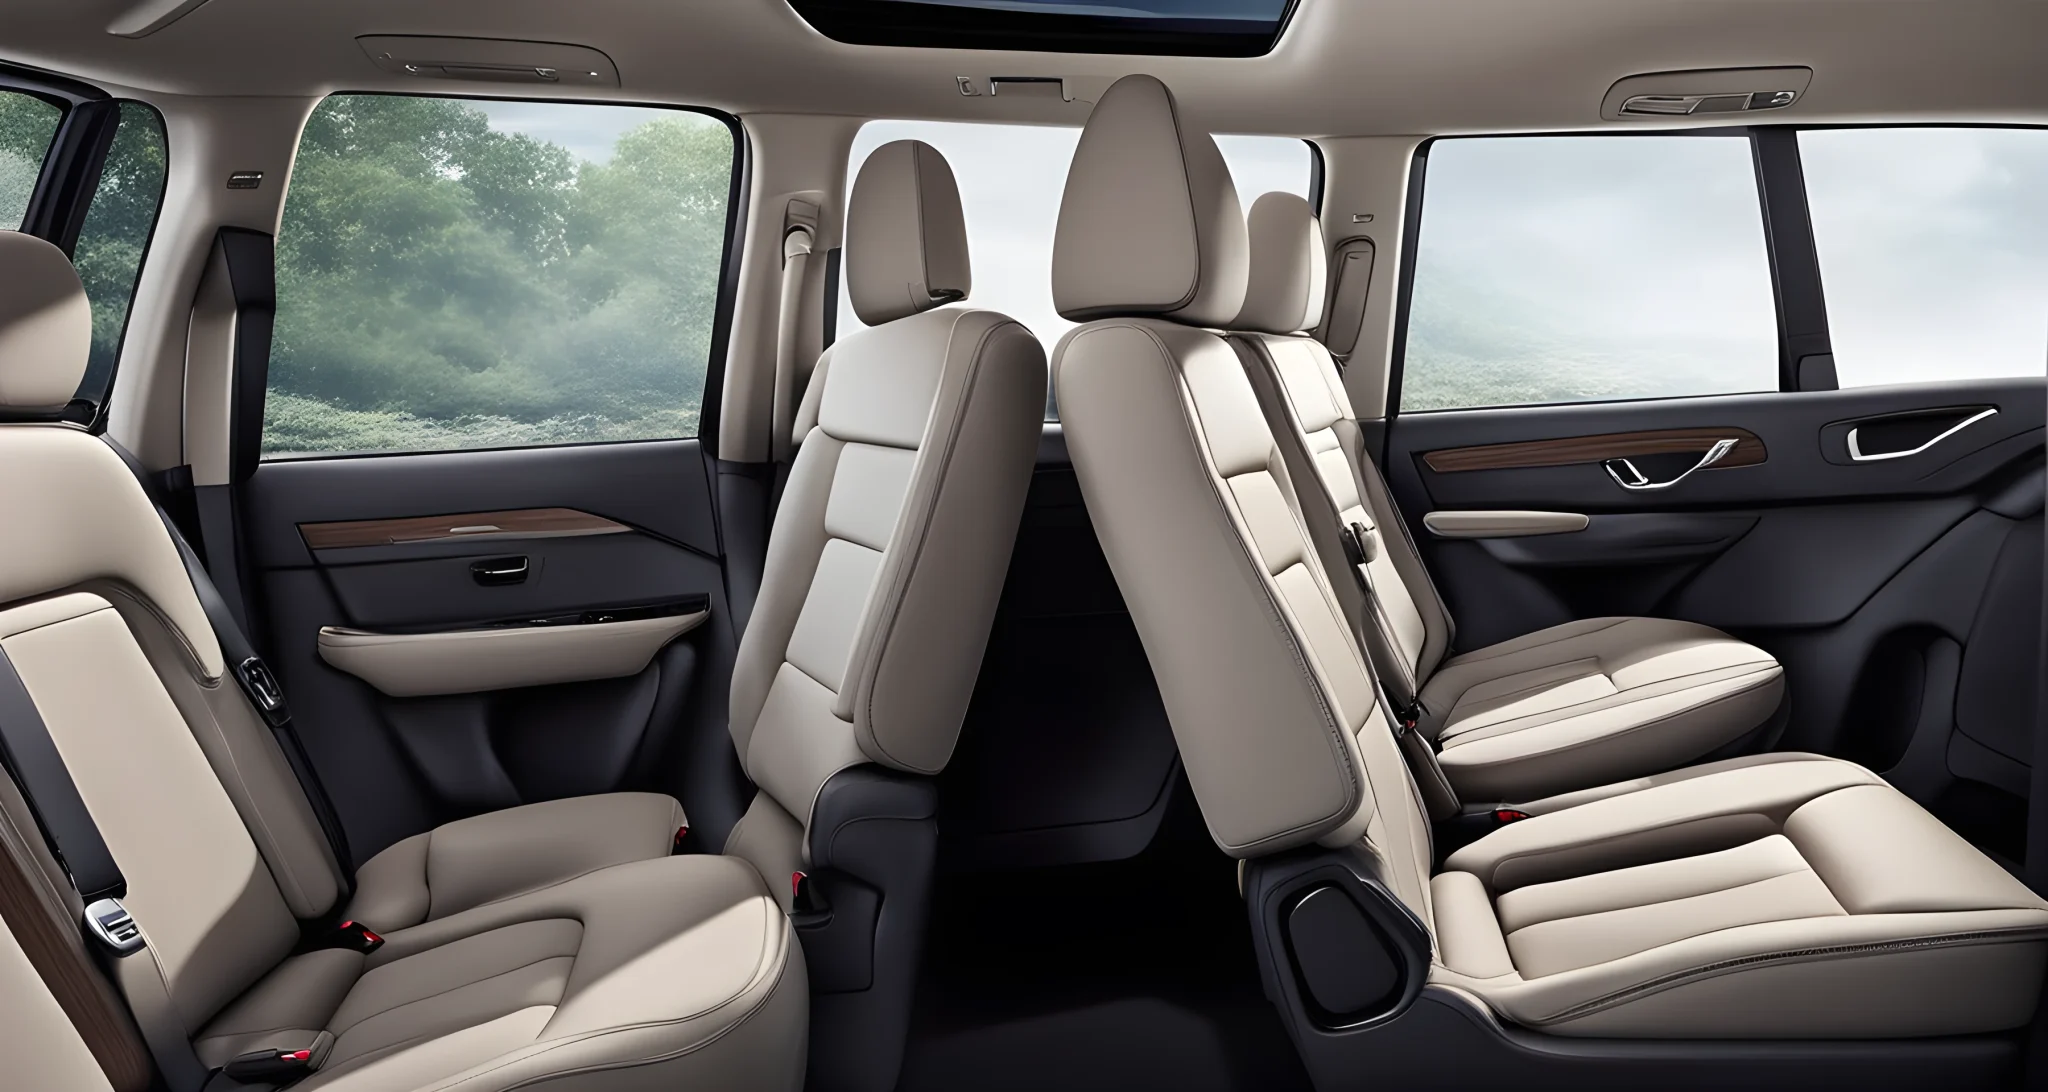 The image shows the redesigned rear seat rails in the 2024 Kia Carnival.